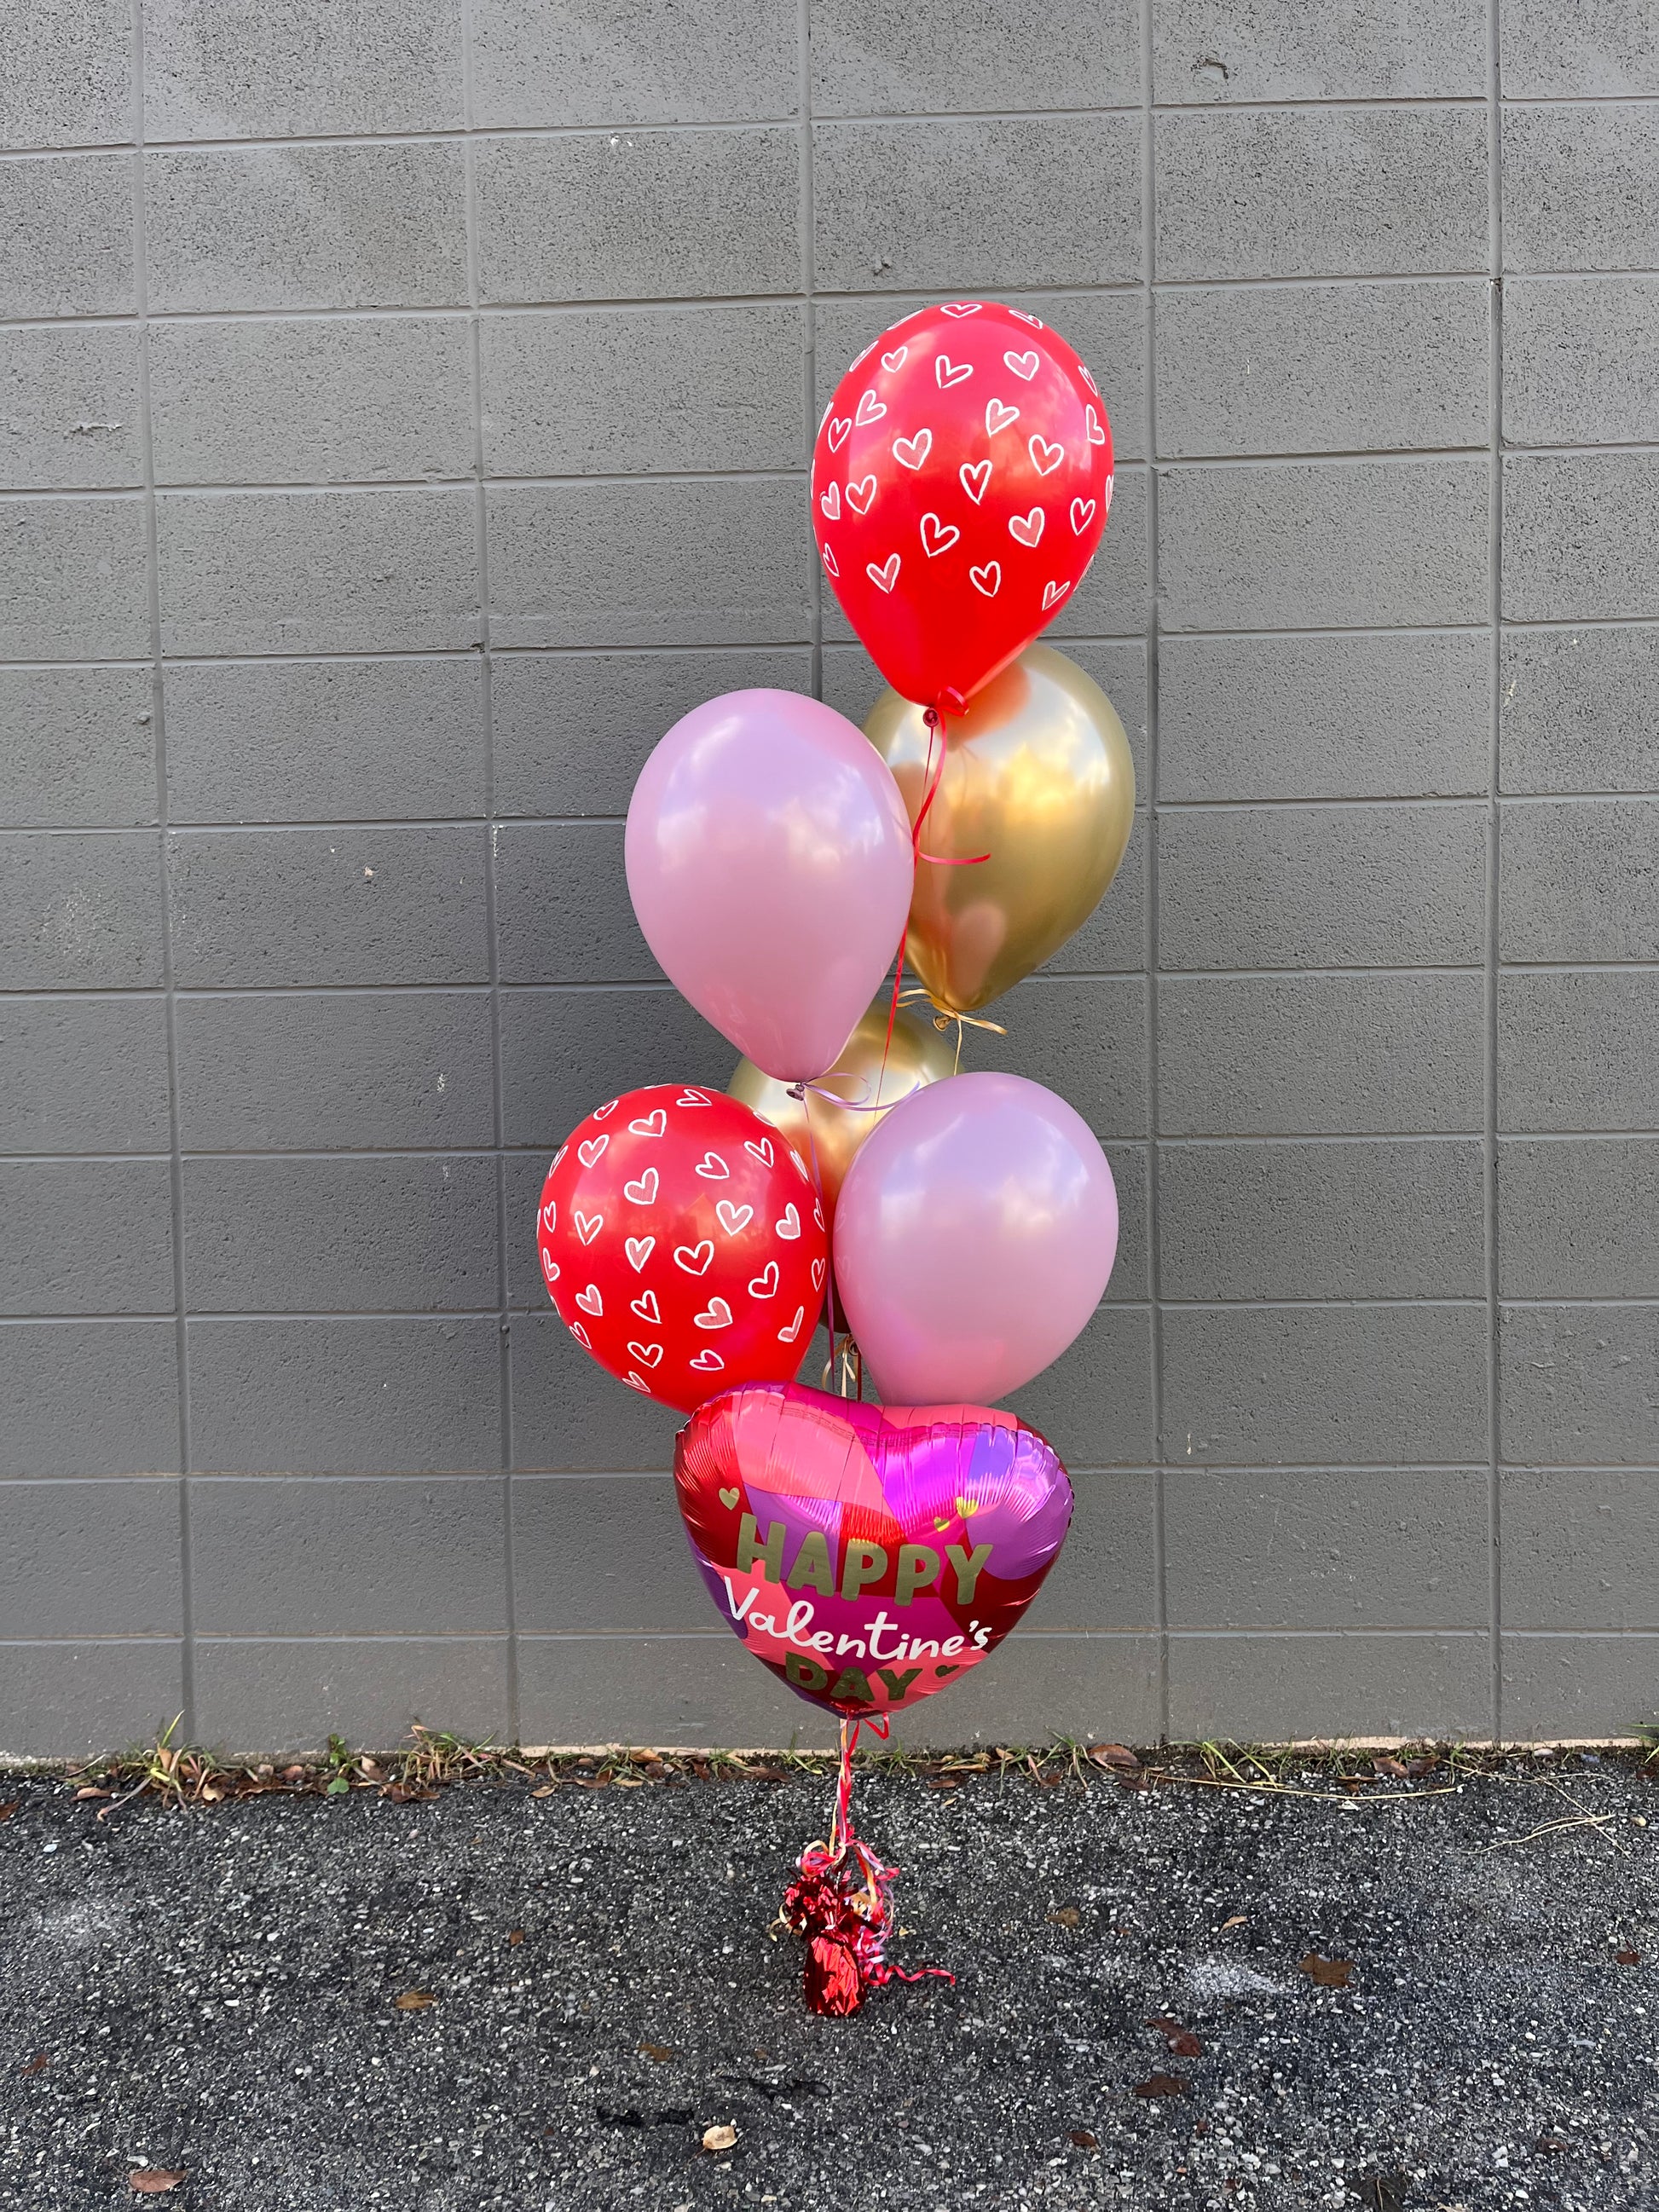 Pioneer Party - Balloons, Gifts, and So Much More! – Pioneer Party Gift and  Copy